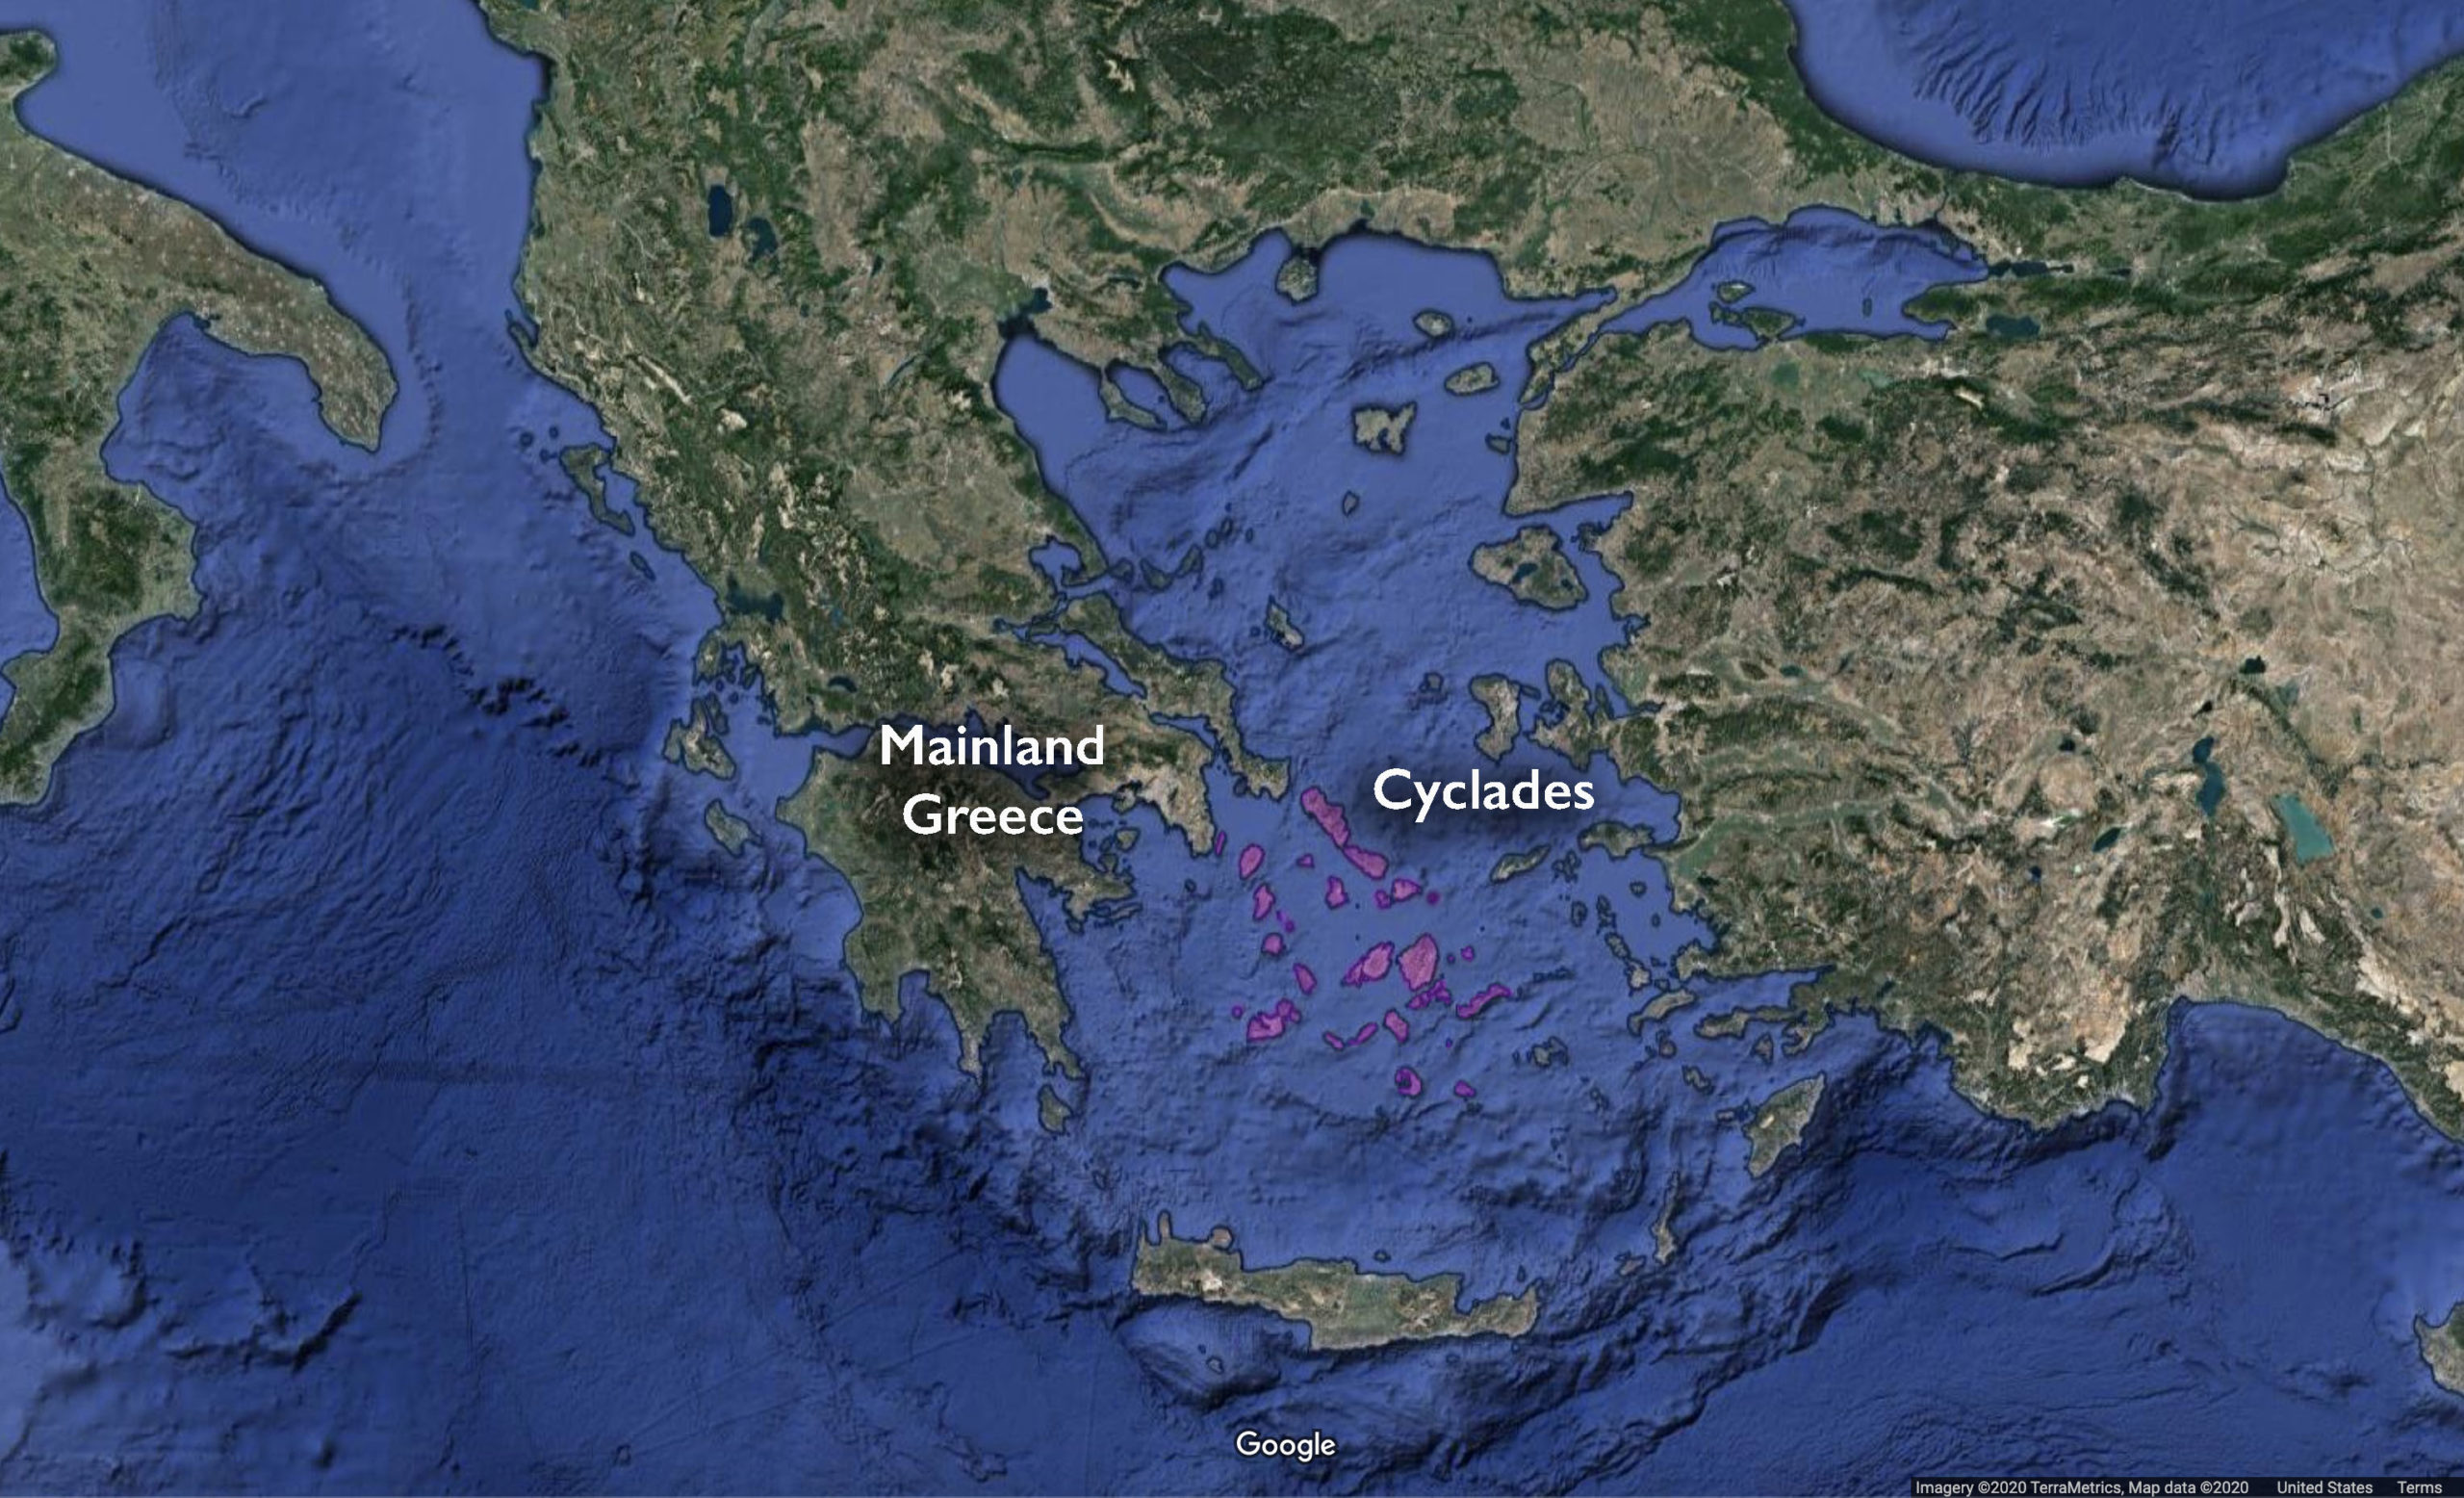 Cyclades on the map of Greece